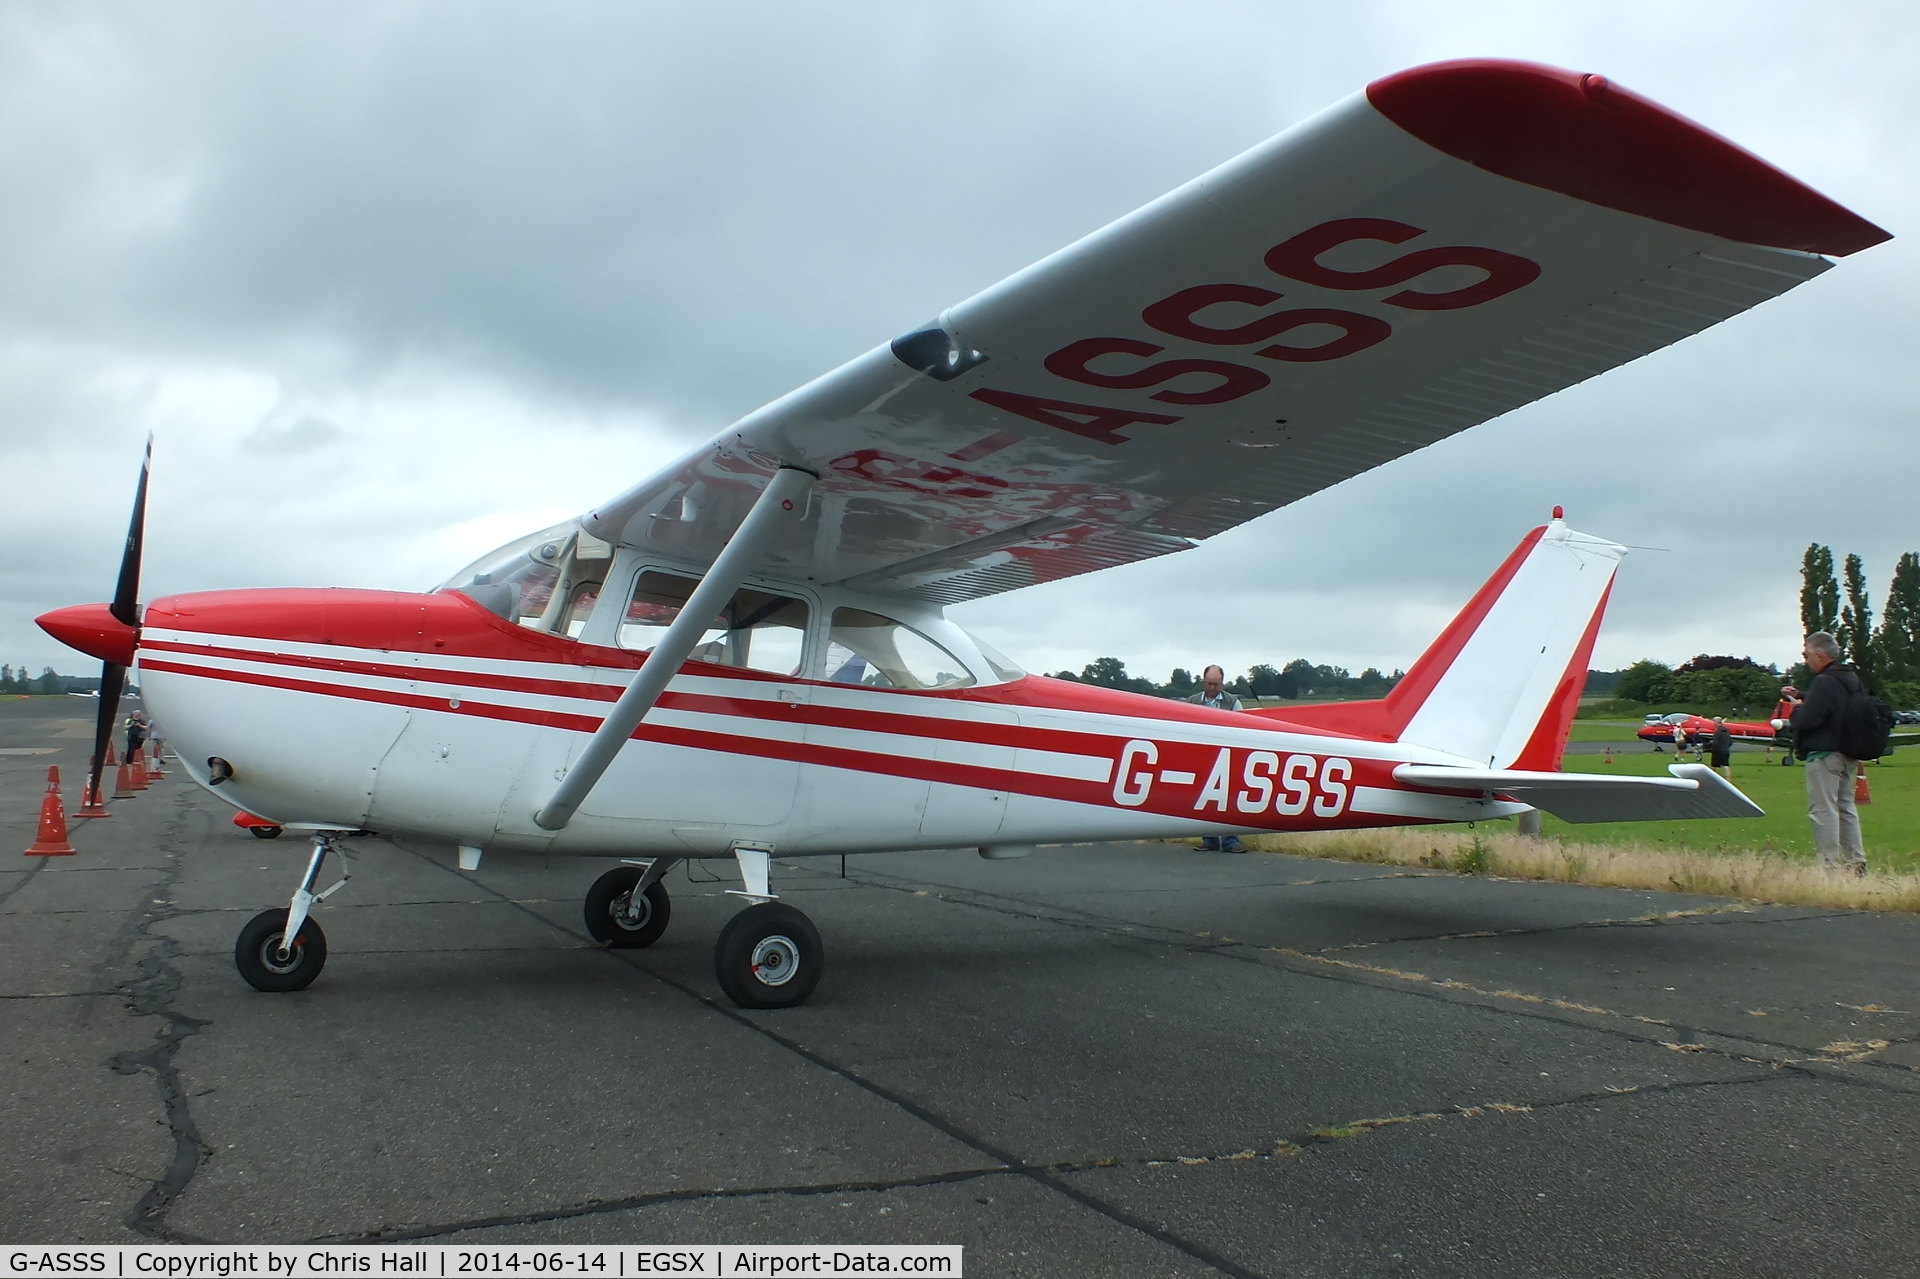 G-ASSS, 1964 Cessna 172E C/N 172-51467, at the Air Britain fly in